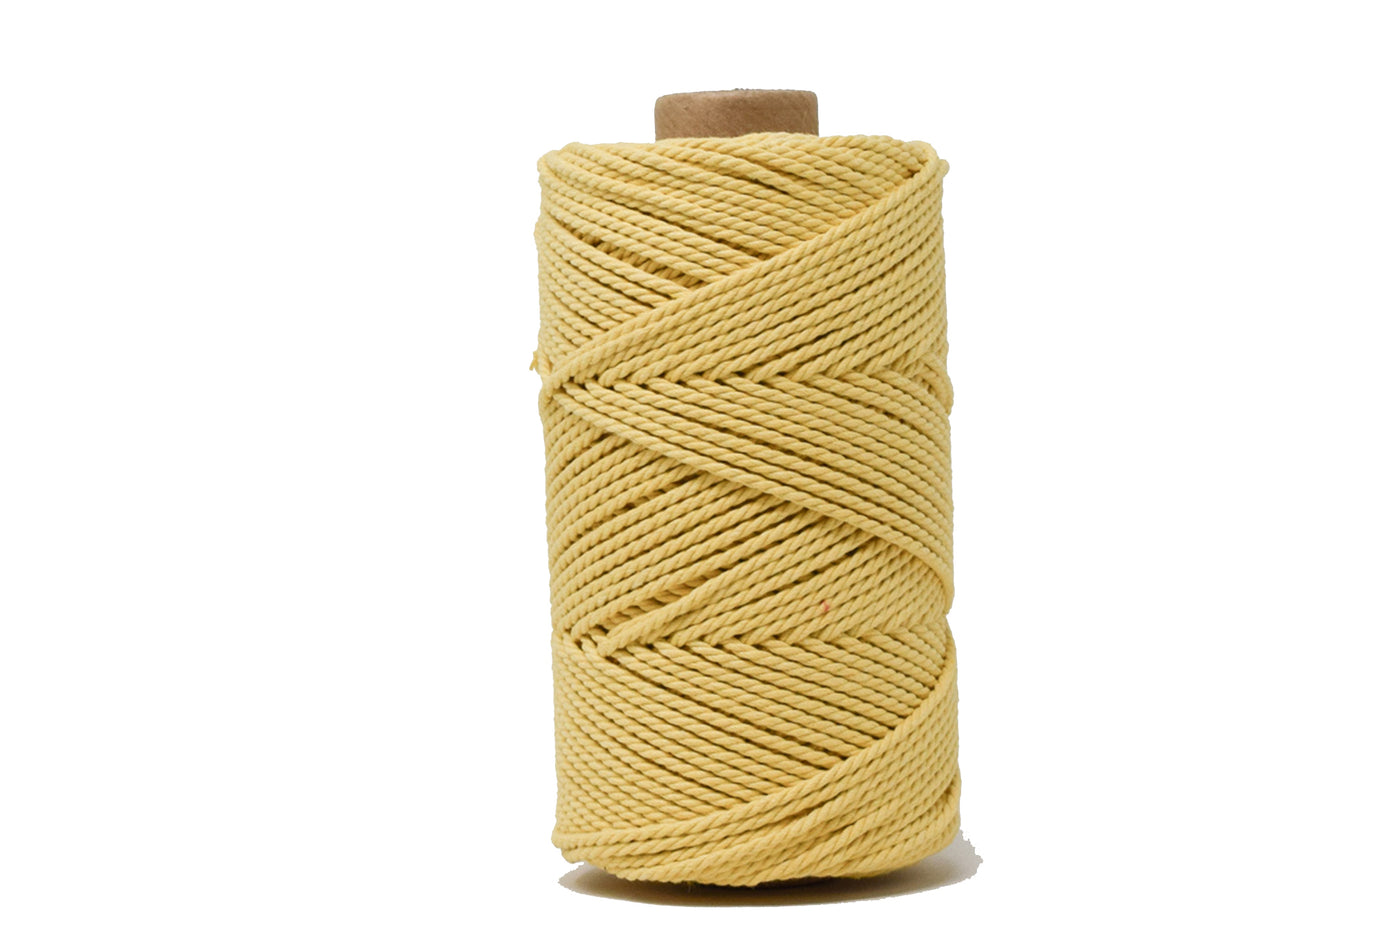 COTTON ROPE ZERO WASTE 2 MM - 3 PLY - SUNFLOWER YELLOW COLOR